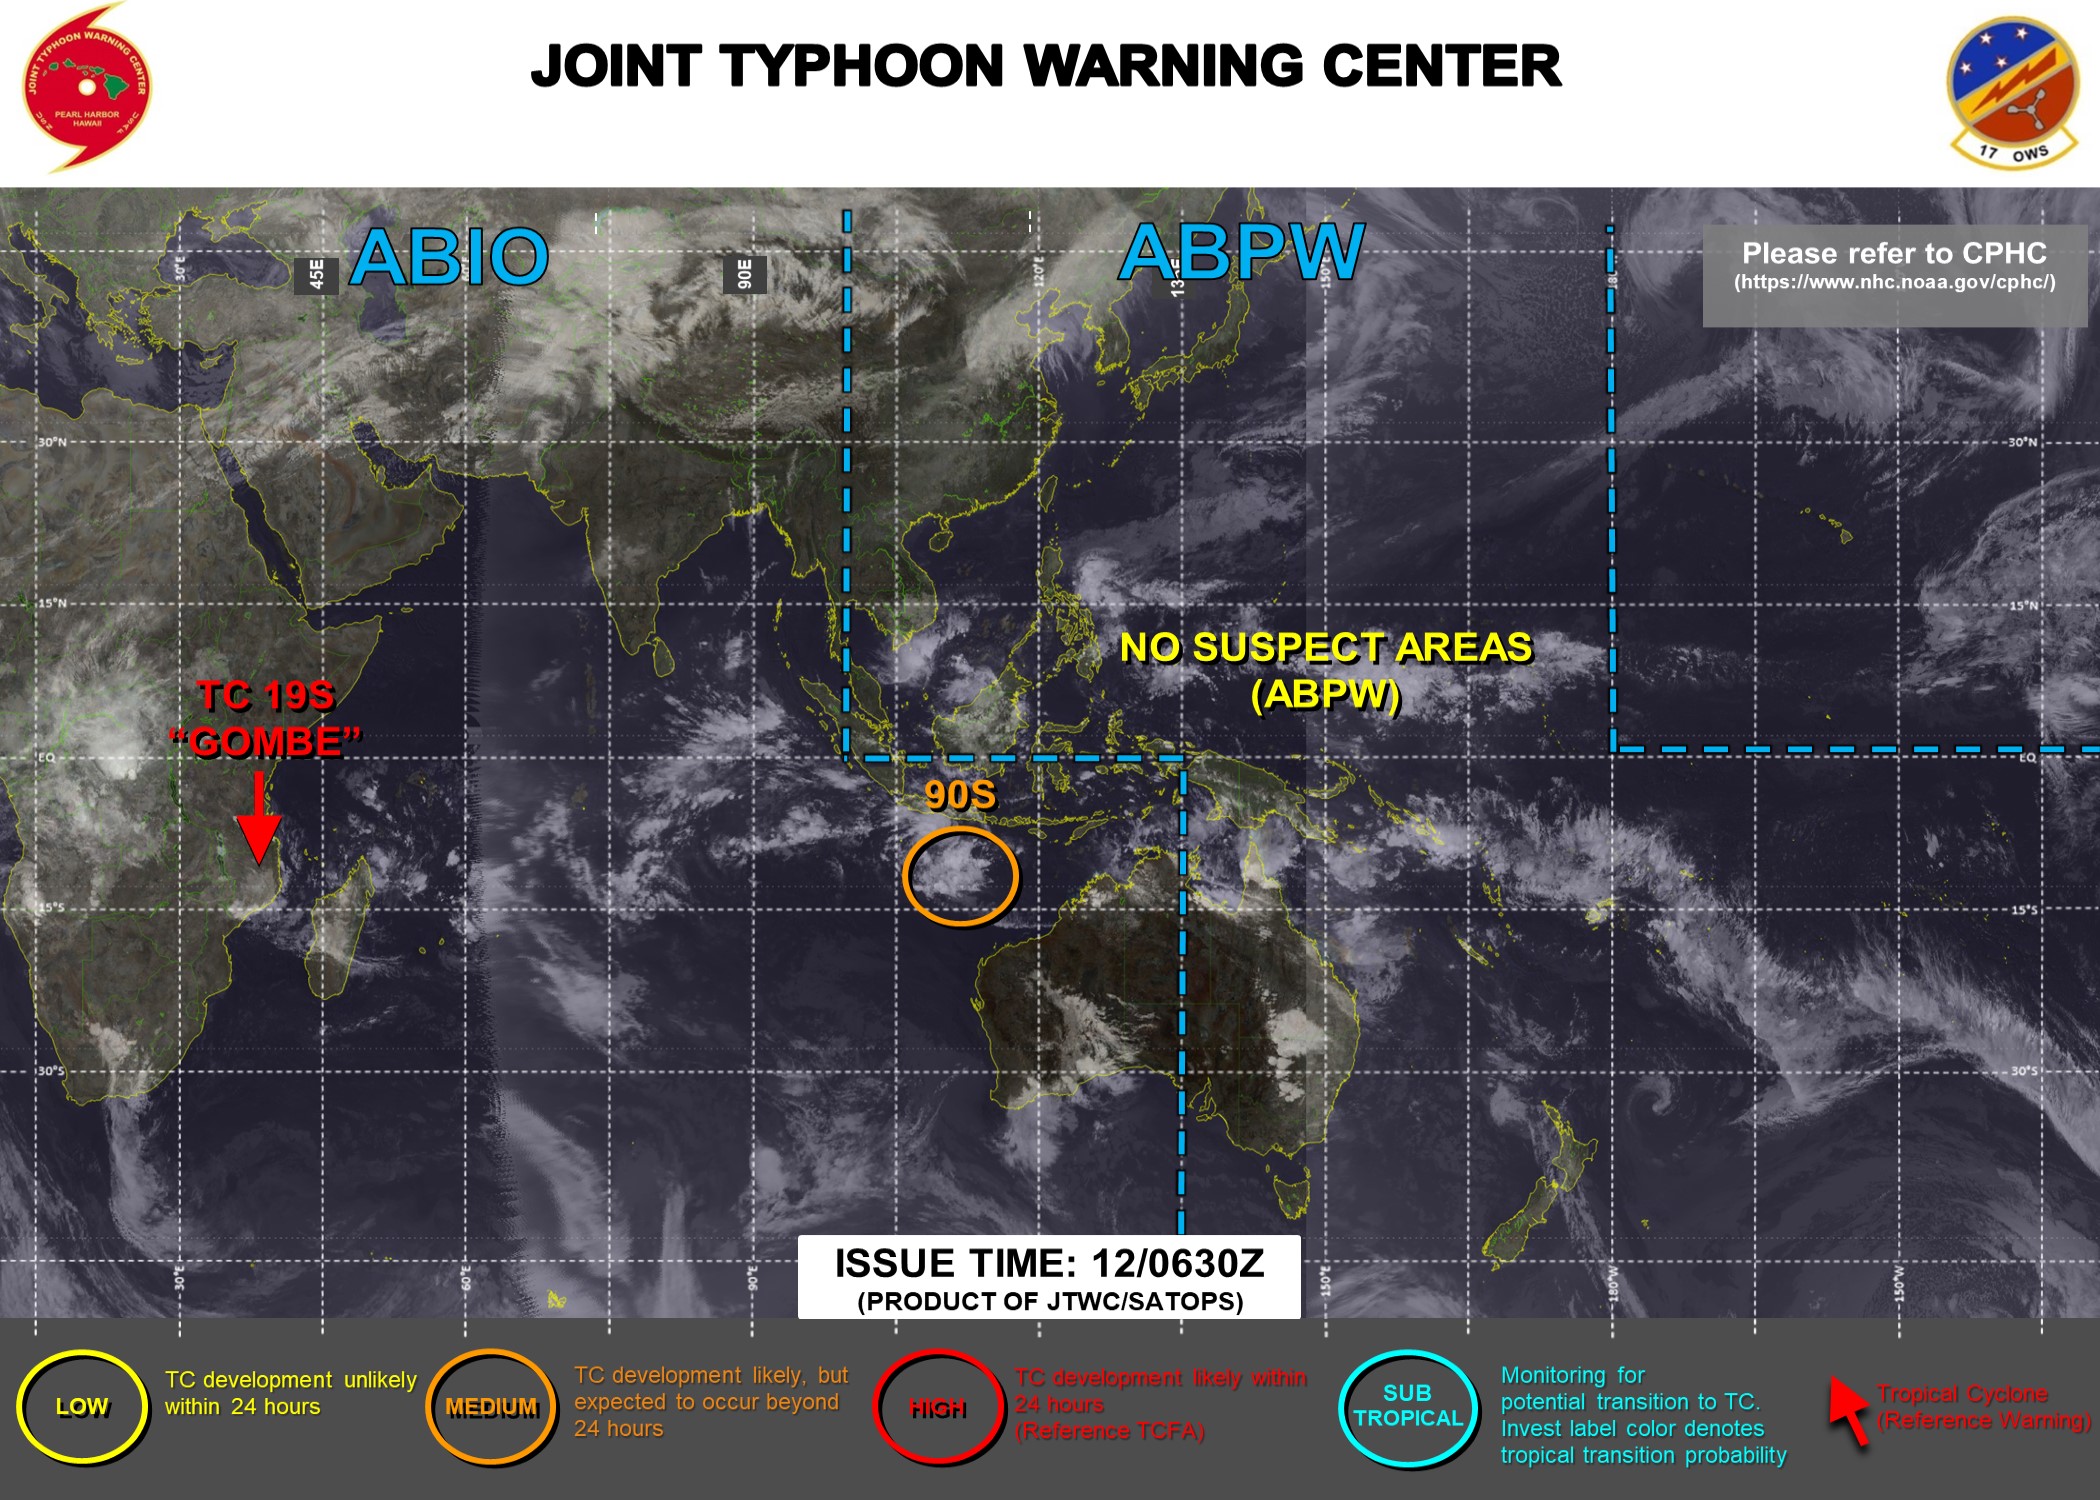 JTWC IS ISSUING 12HOURLY WARNINGS ON TC 19S(GOMBE). 3HOURLY SATELLITE BULLETINS ARE ISSUED ON 19S AND INVEST 90S.